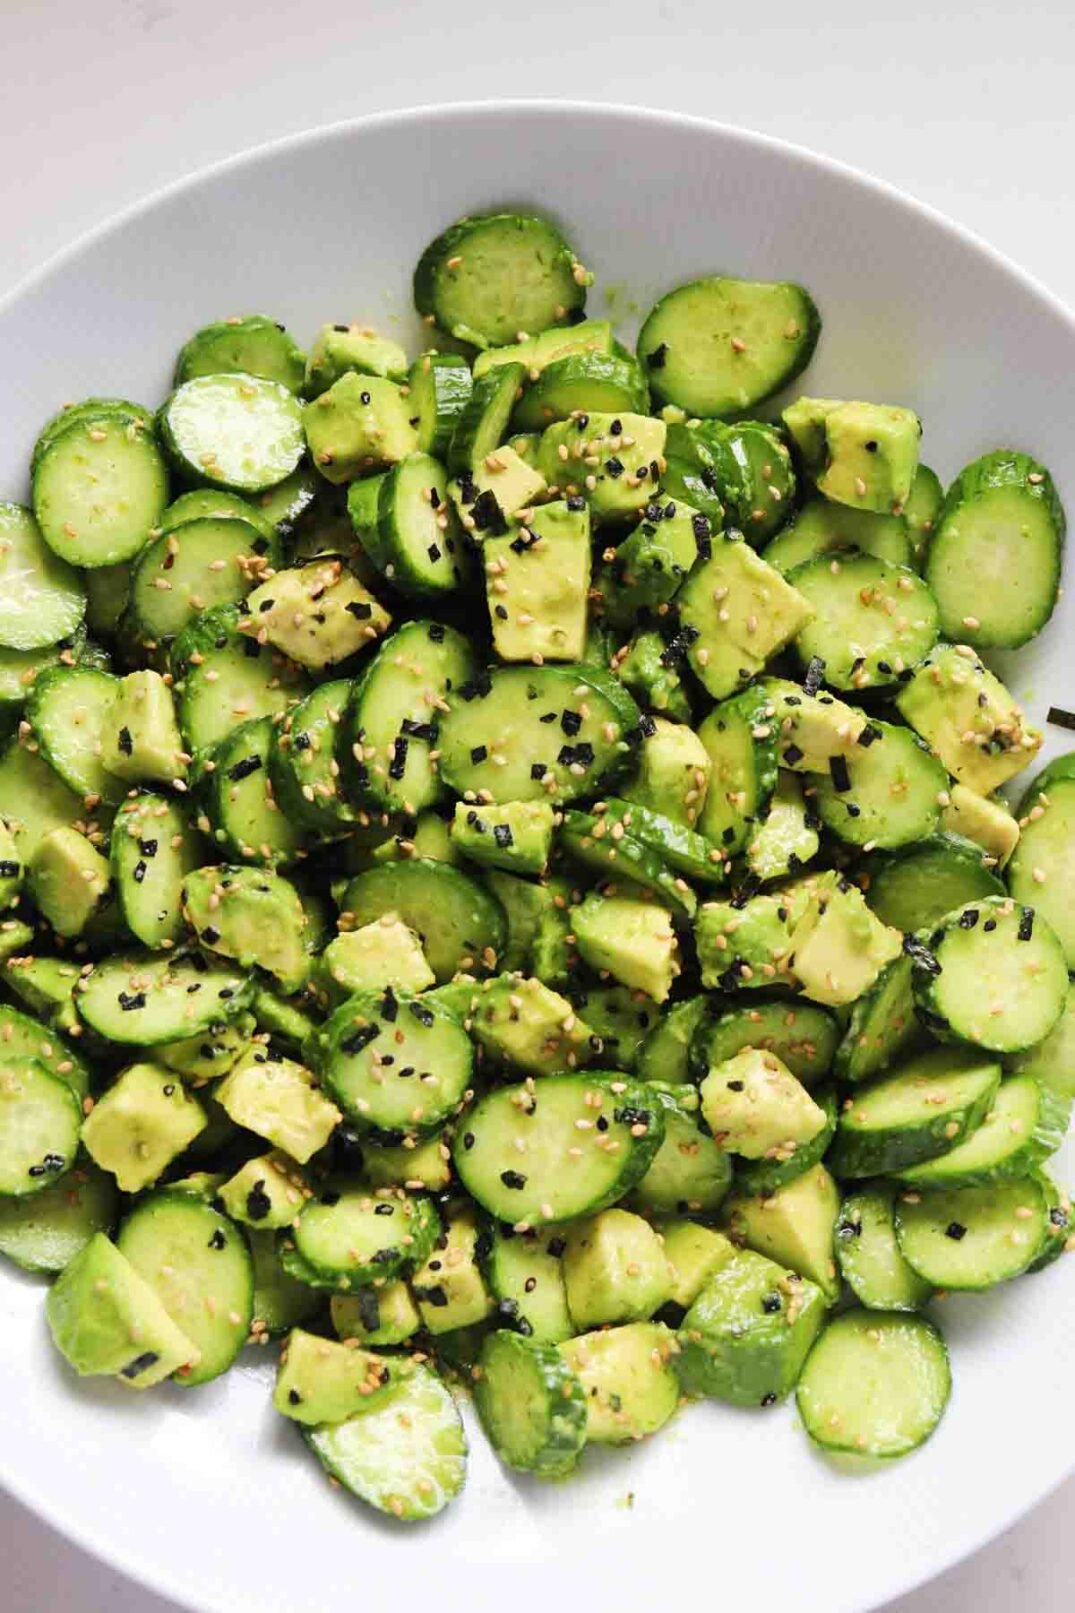 cubed avocado, sliced cucumbers and sprinkles of furikake in a white bowl on a white counter.